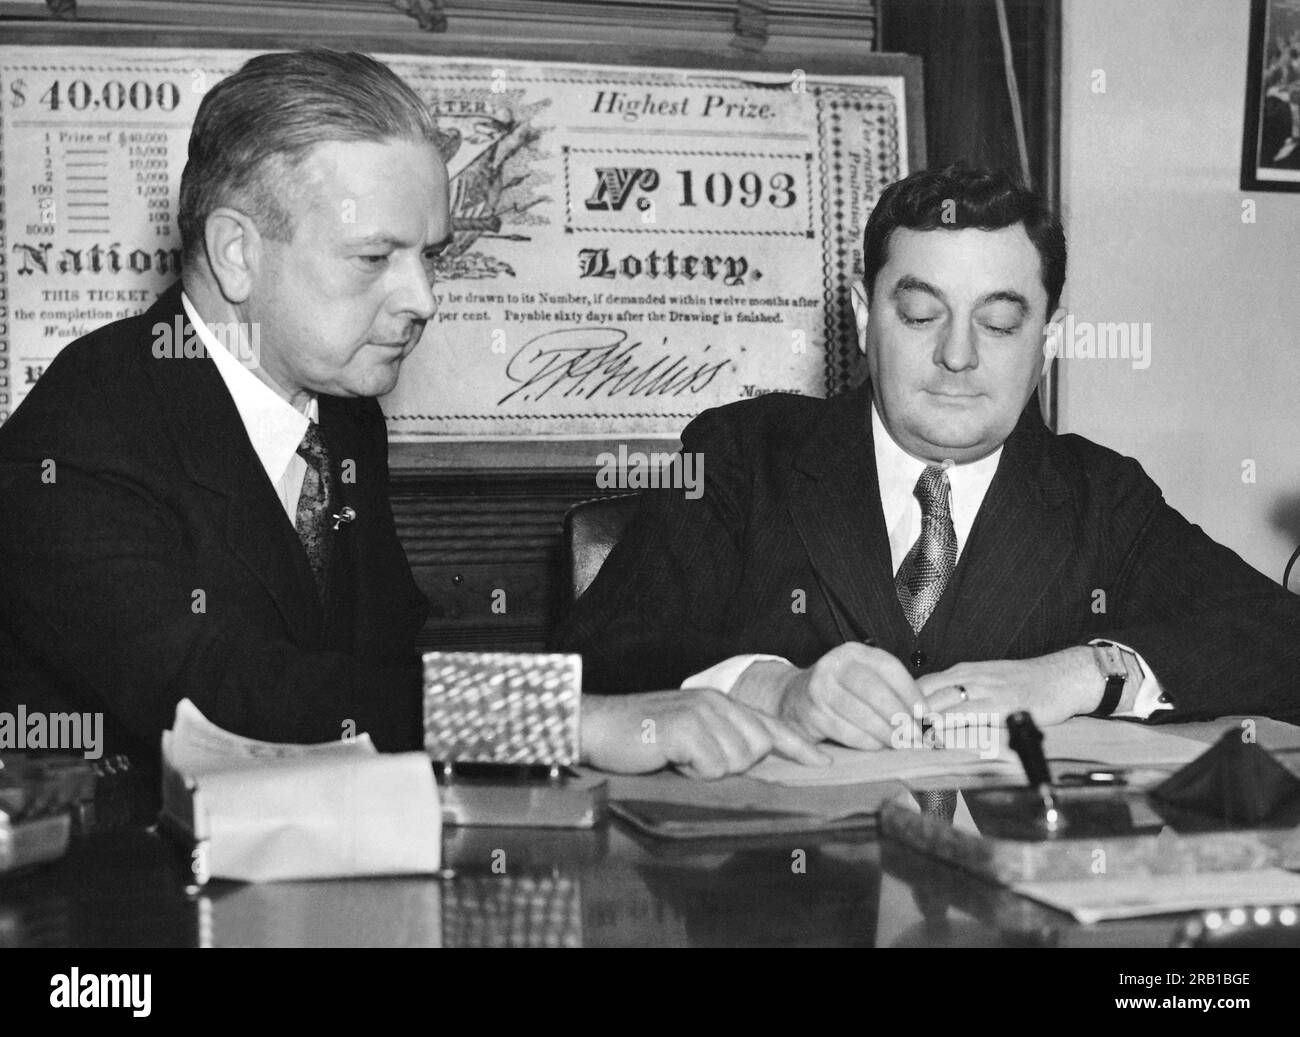 Washington, D.C.:  February 4, 1936 Congressman Edward Kenney (left) of New Jersey watches Rep. Joseph Gavagan of New York sign his petition calling for a vote on a national lottery to fund the WWI  Bonus Army payment. Stock Photo